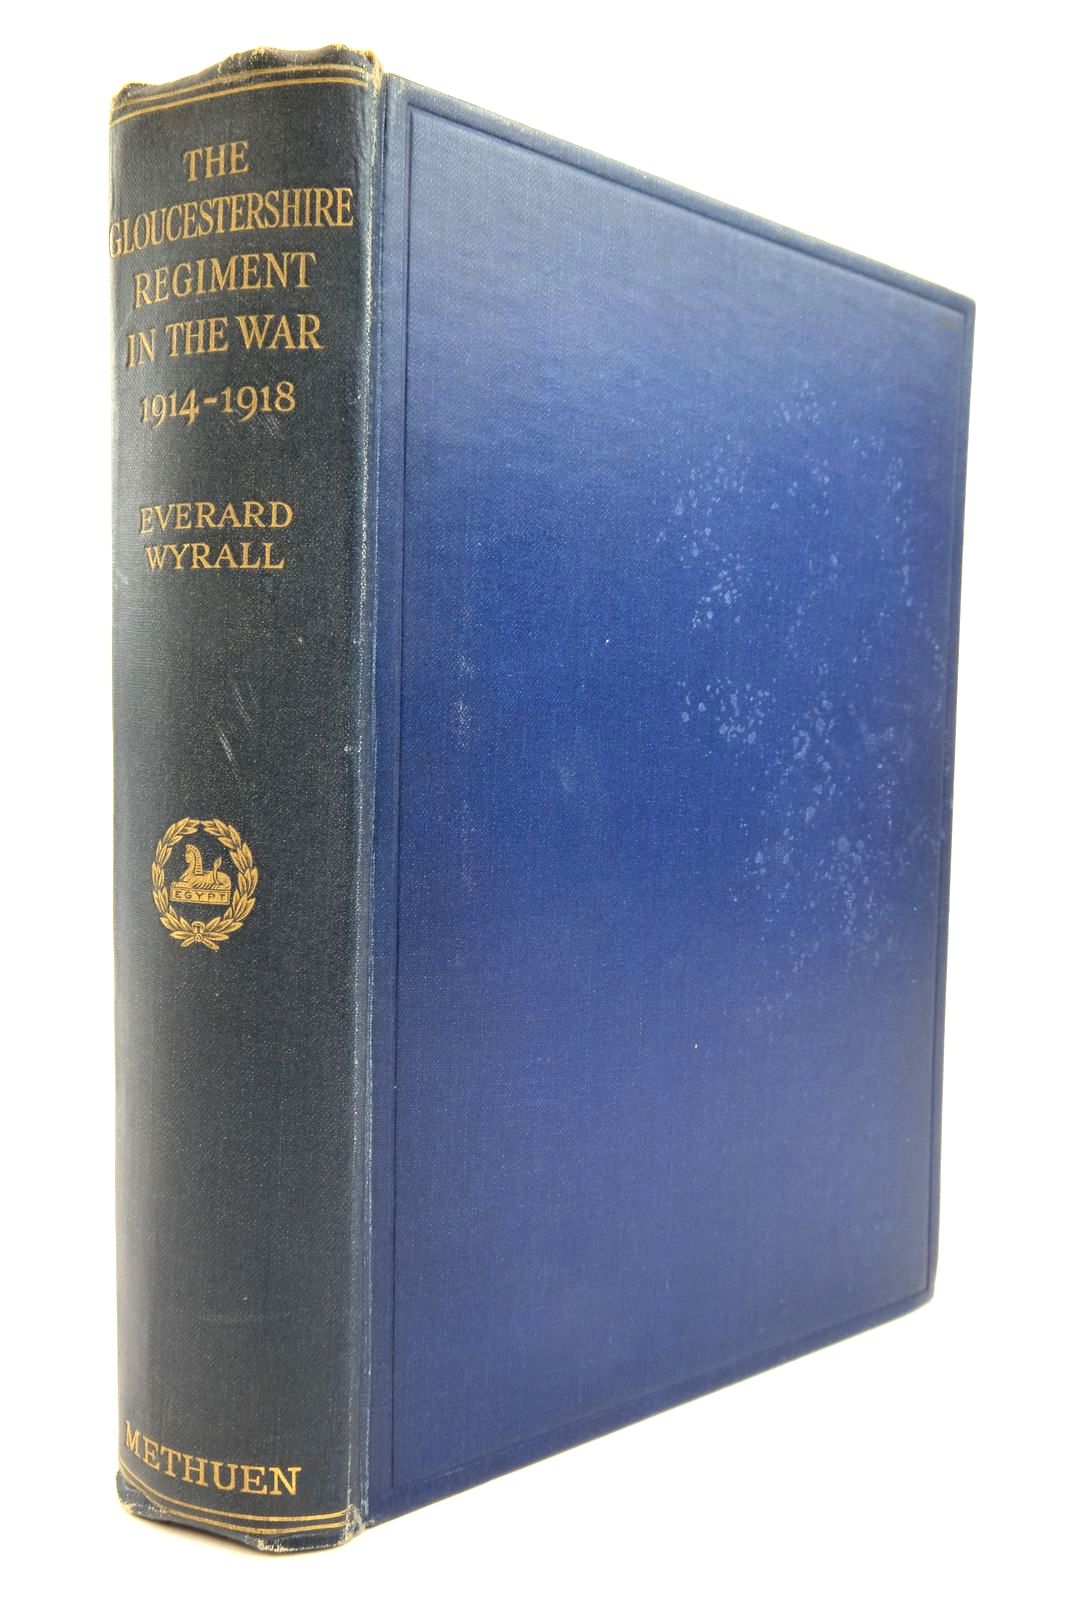 Photo of THE GLOUCESTERSHIRE REGIMENT IN THE WAR 1914-1918 written by Wyrall, Everard
Milne, G.F. published by Methuen & Co. Ltd. (STOCK CODE: 2137379)  for sale by Stella & Rose's Books